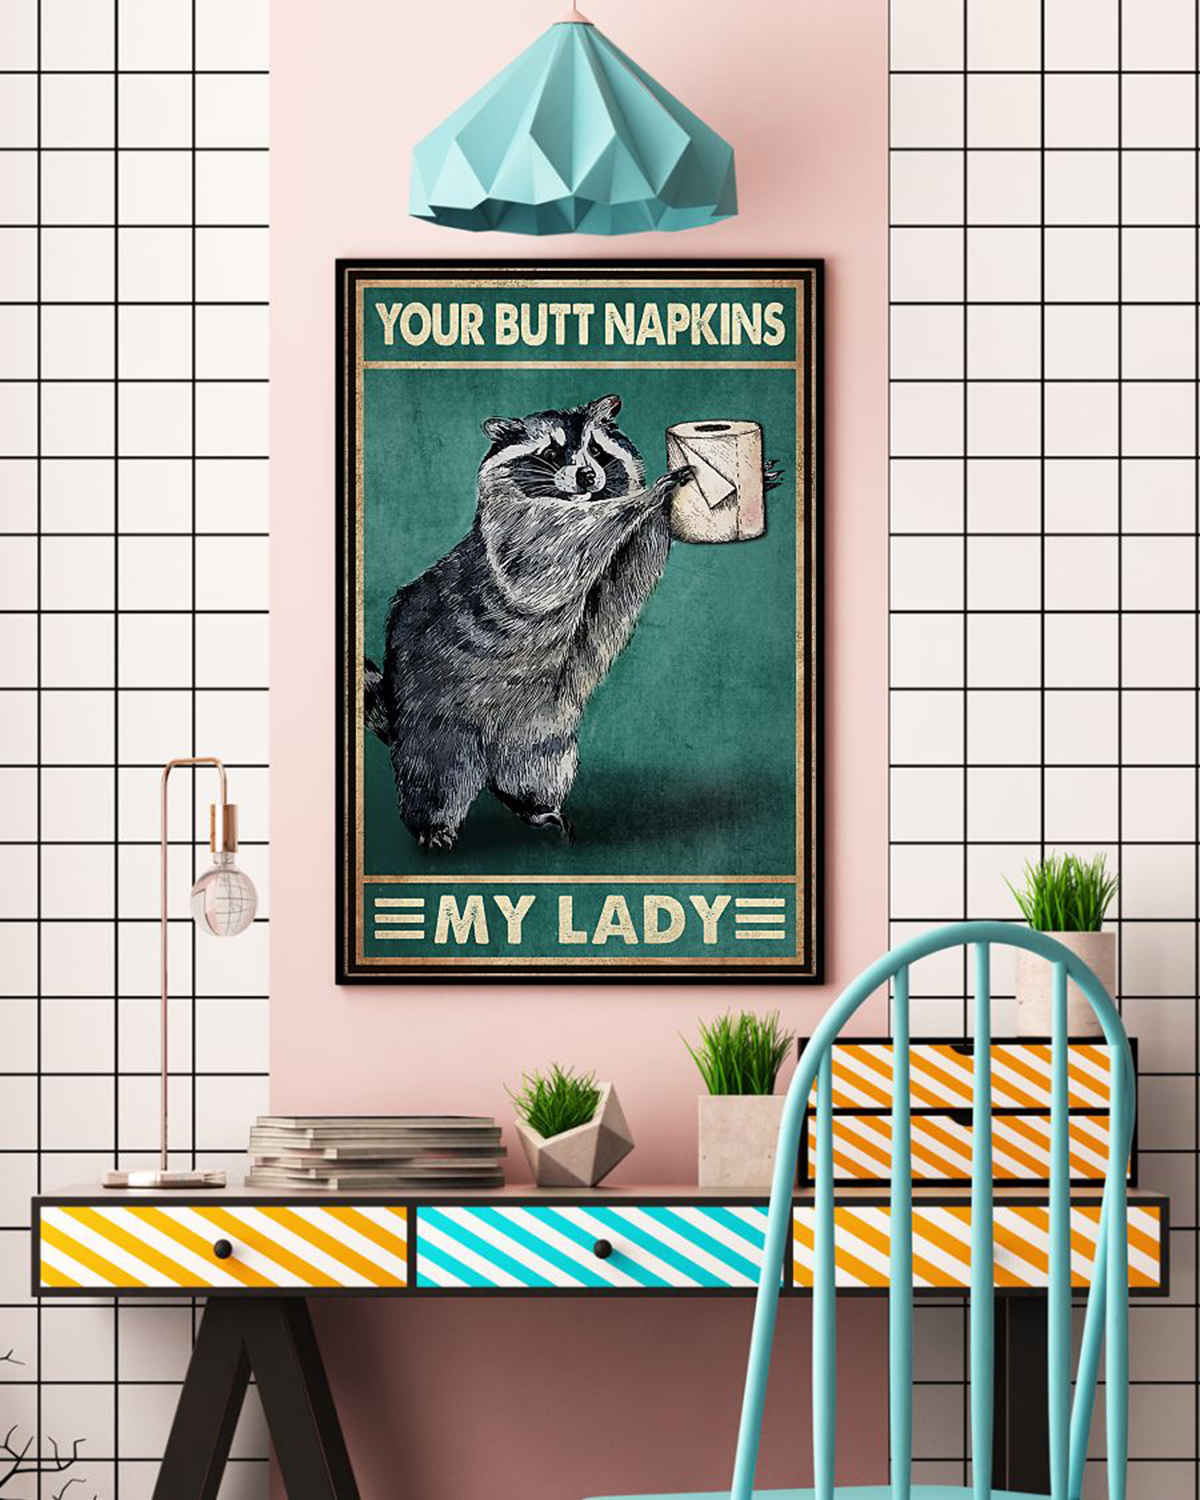 Your butt napkins my lady racoon poster